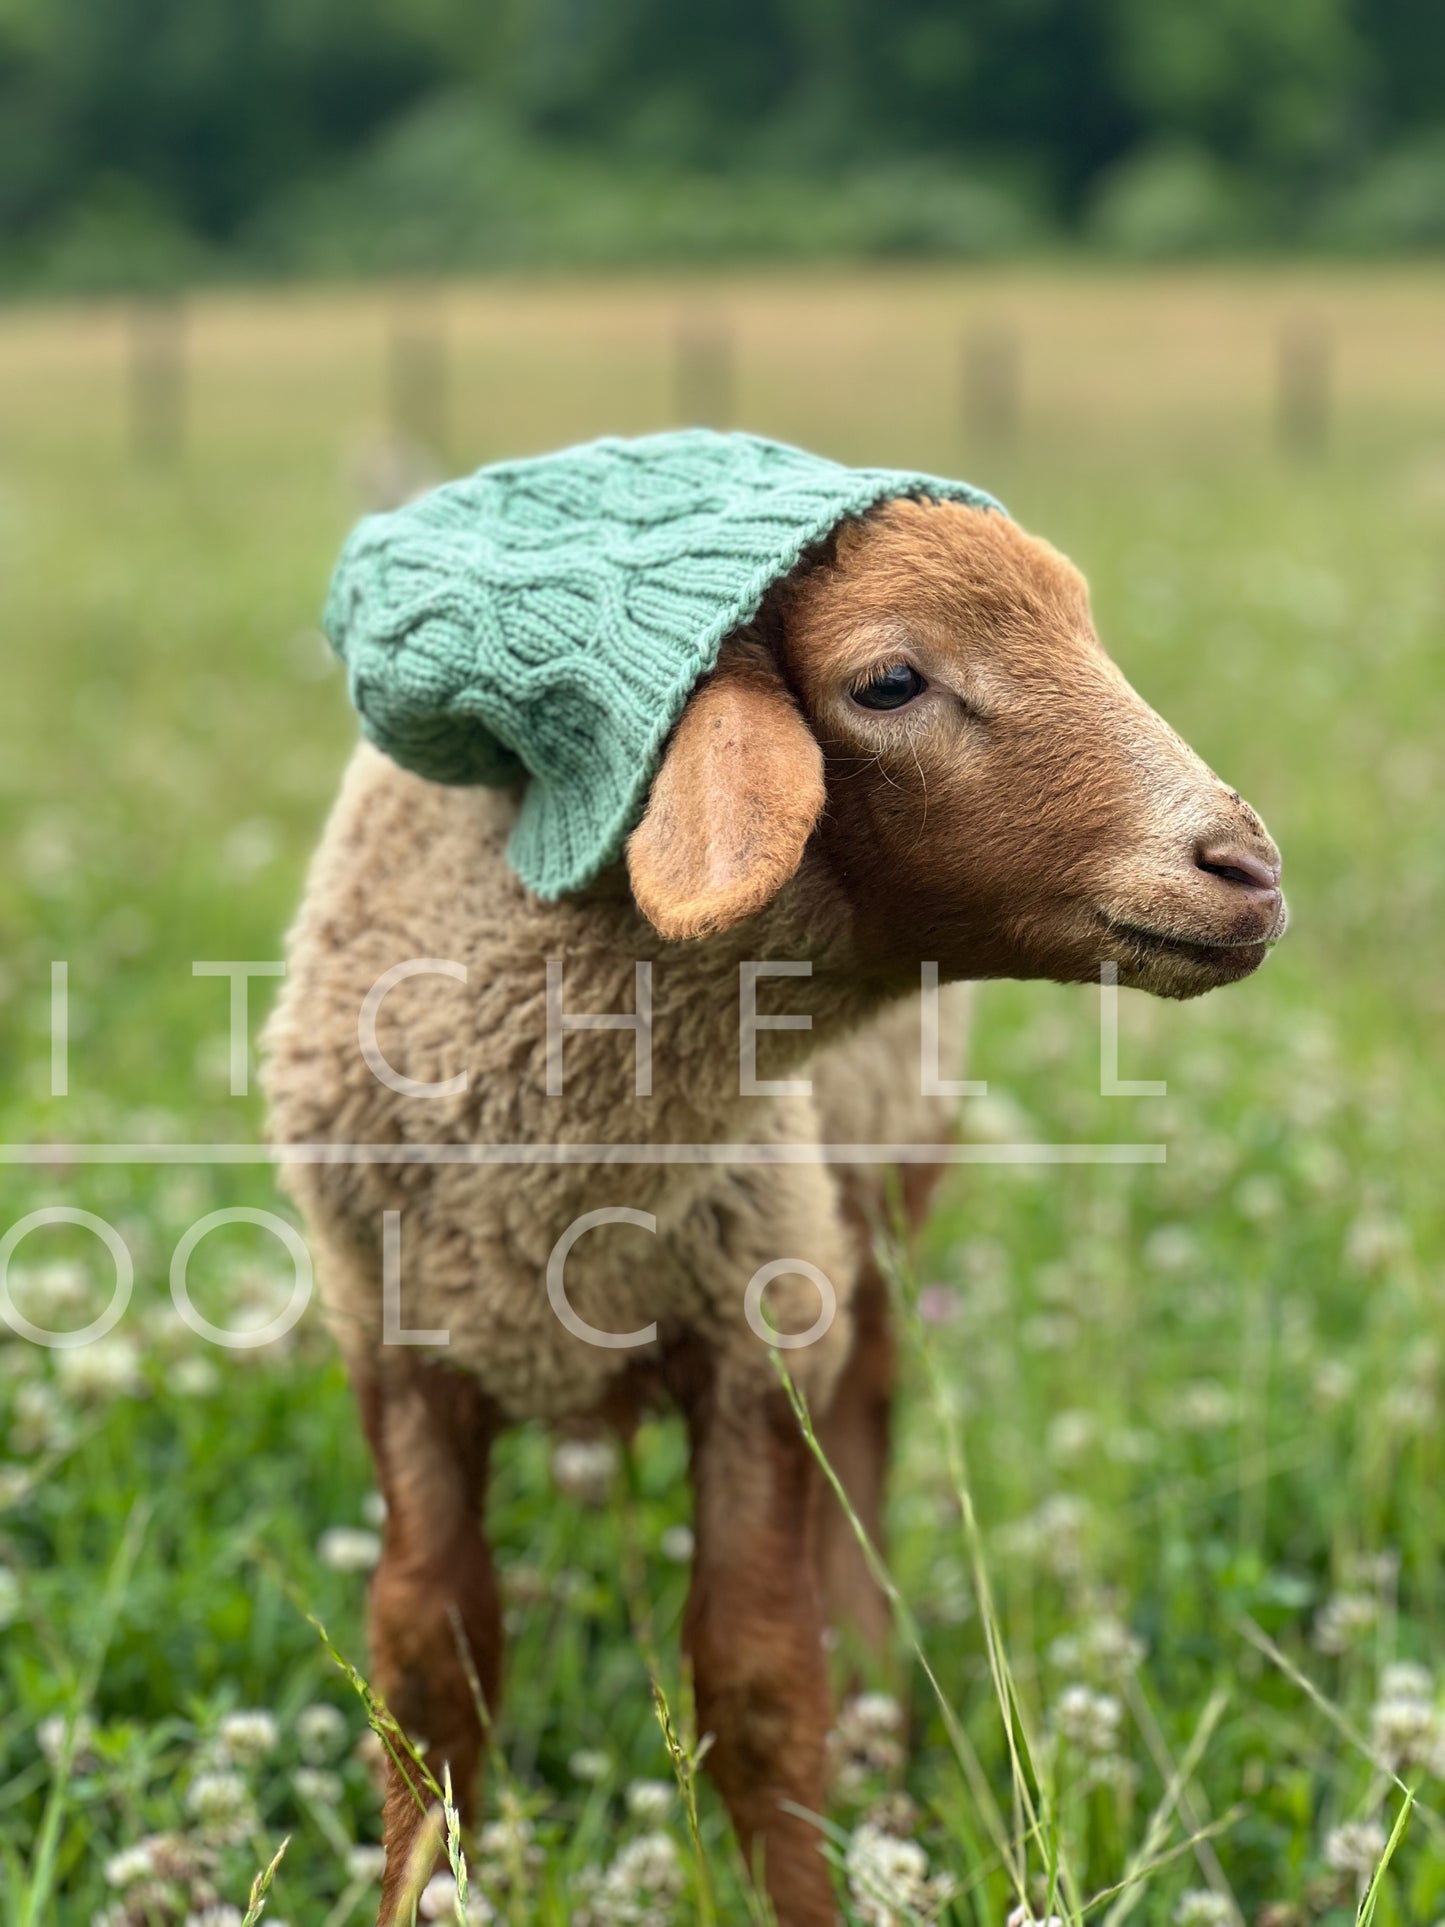 Chloe - a hipster lamb chills in a clover and alfalfa filled pasture wearing a plant dyed green hat knit from the wool of her mama and aunties. Nothing but Nature is how we roll.